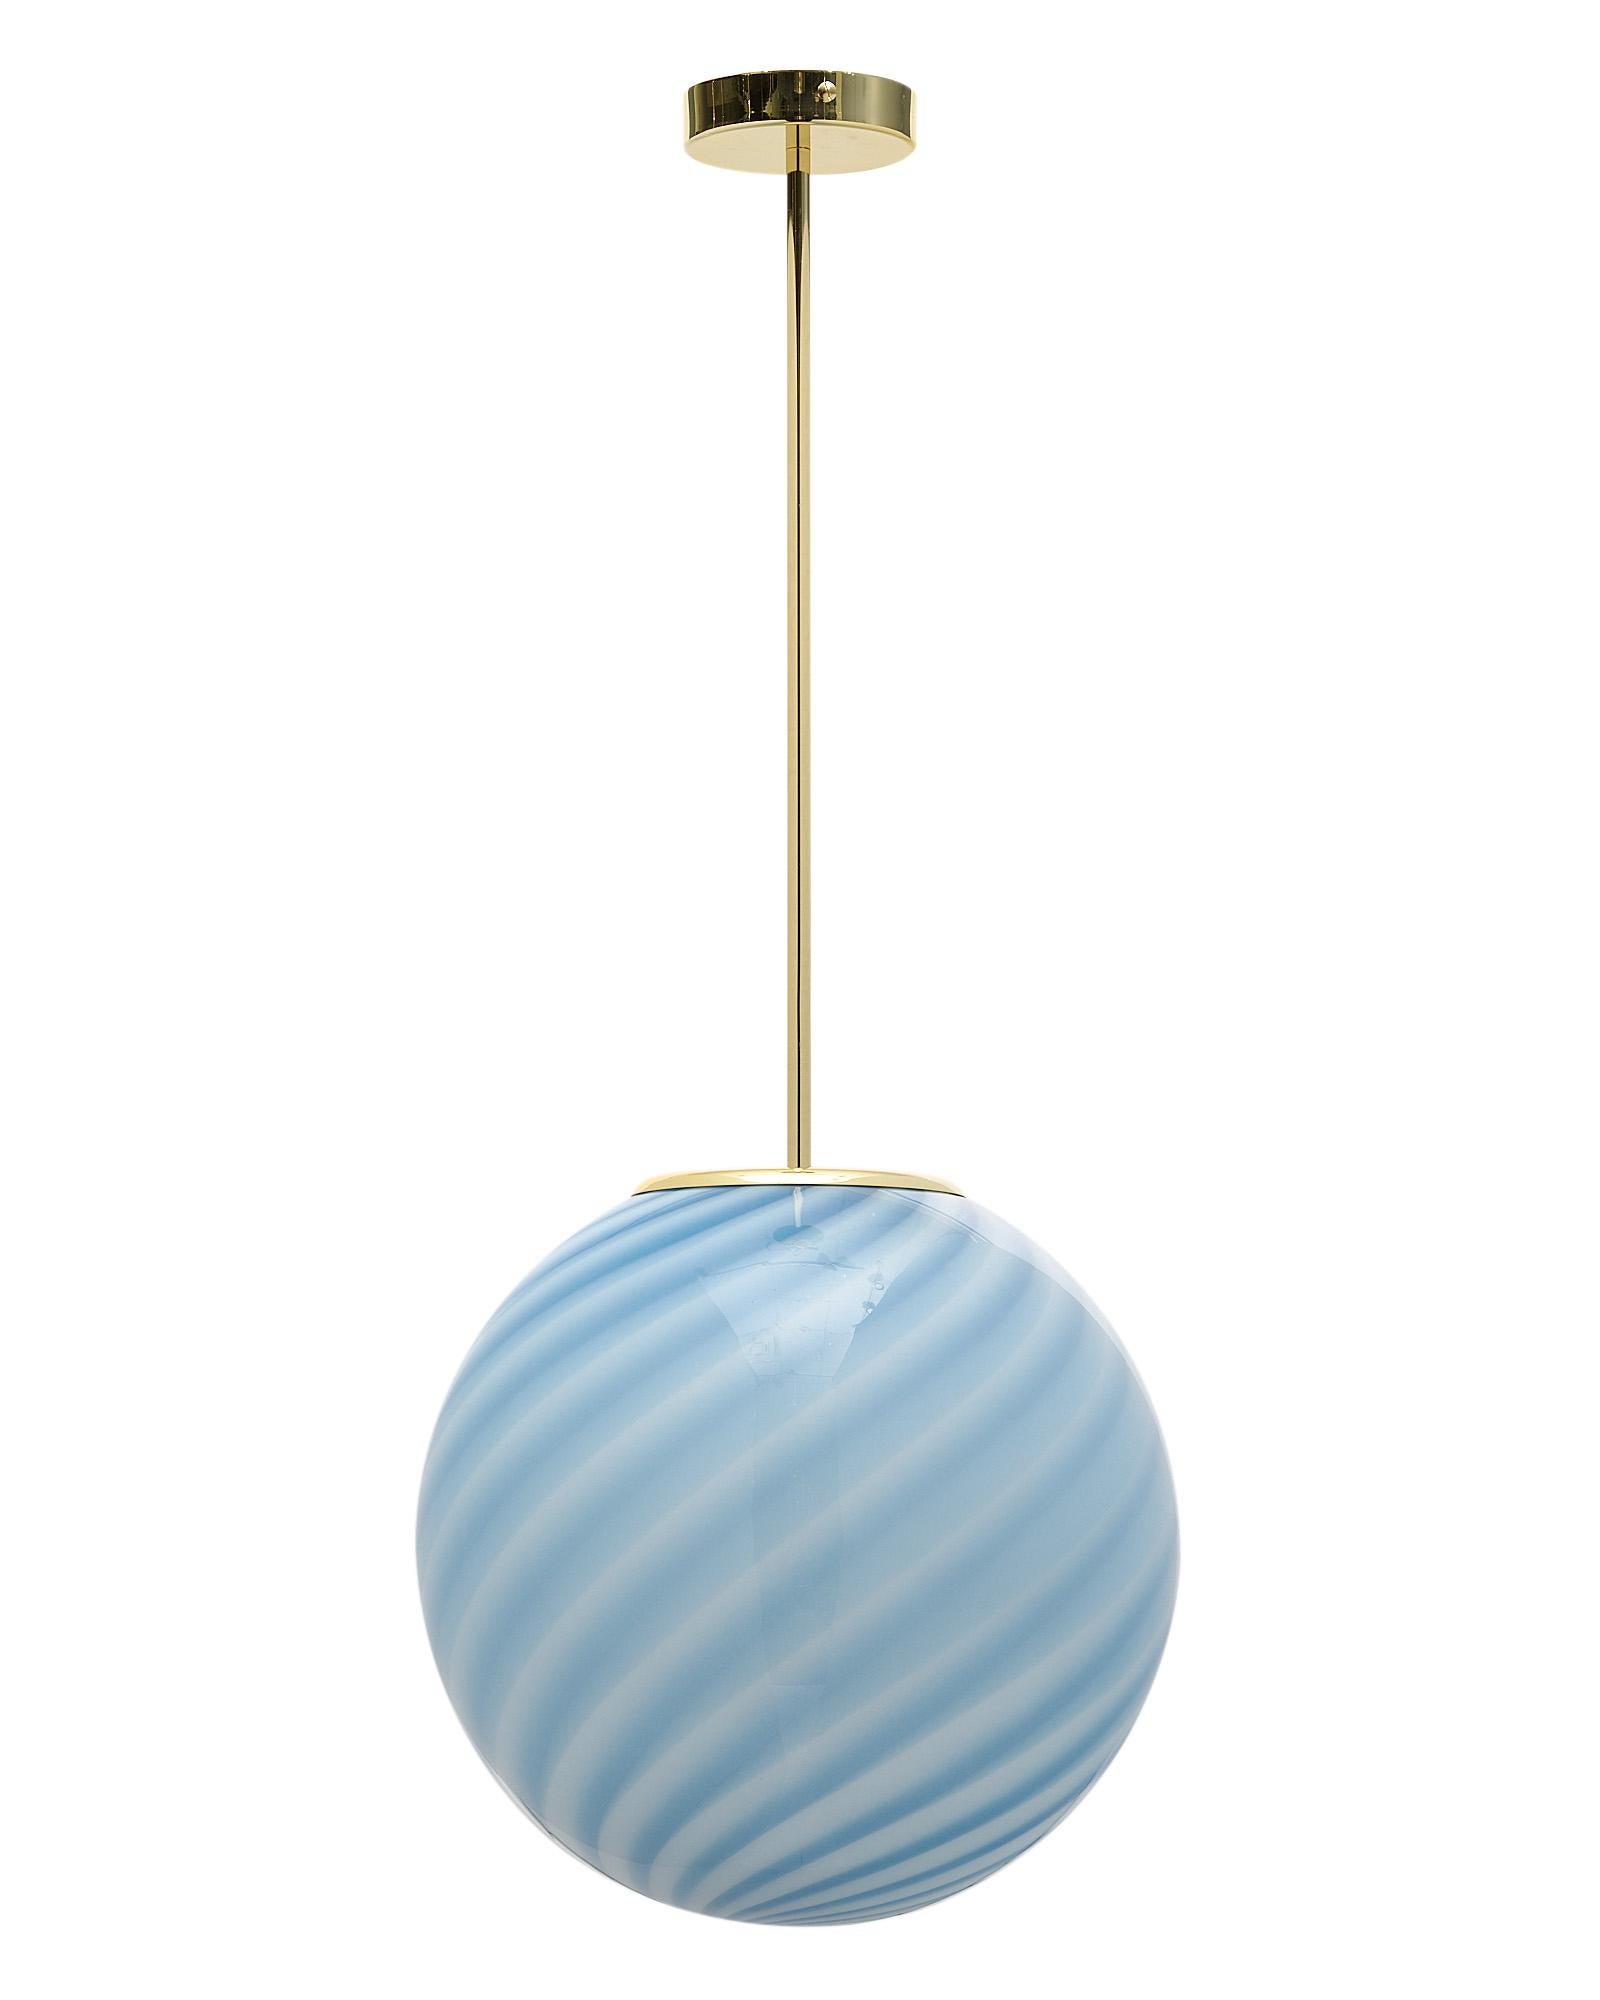 Spheric glass pendant light, Italian, from the island of Murano. This hand-blown glass globe features a blue and white swirling pattern. A galvanized gilt brass stem and canopy support this fixture. It has been newly wired to fit US standards.